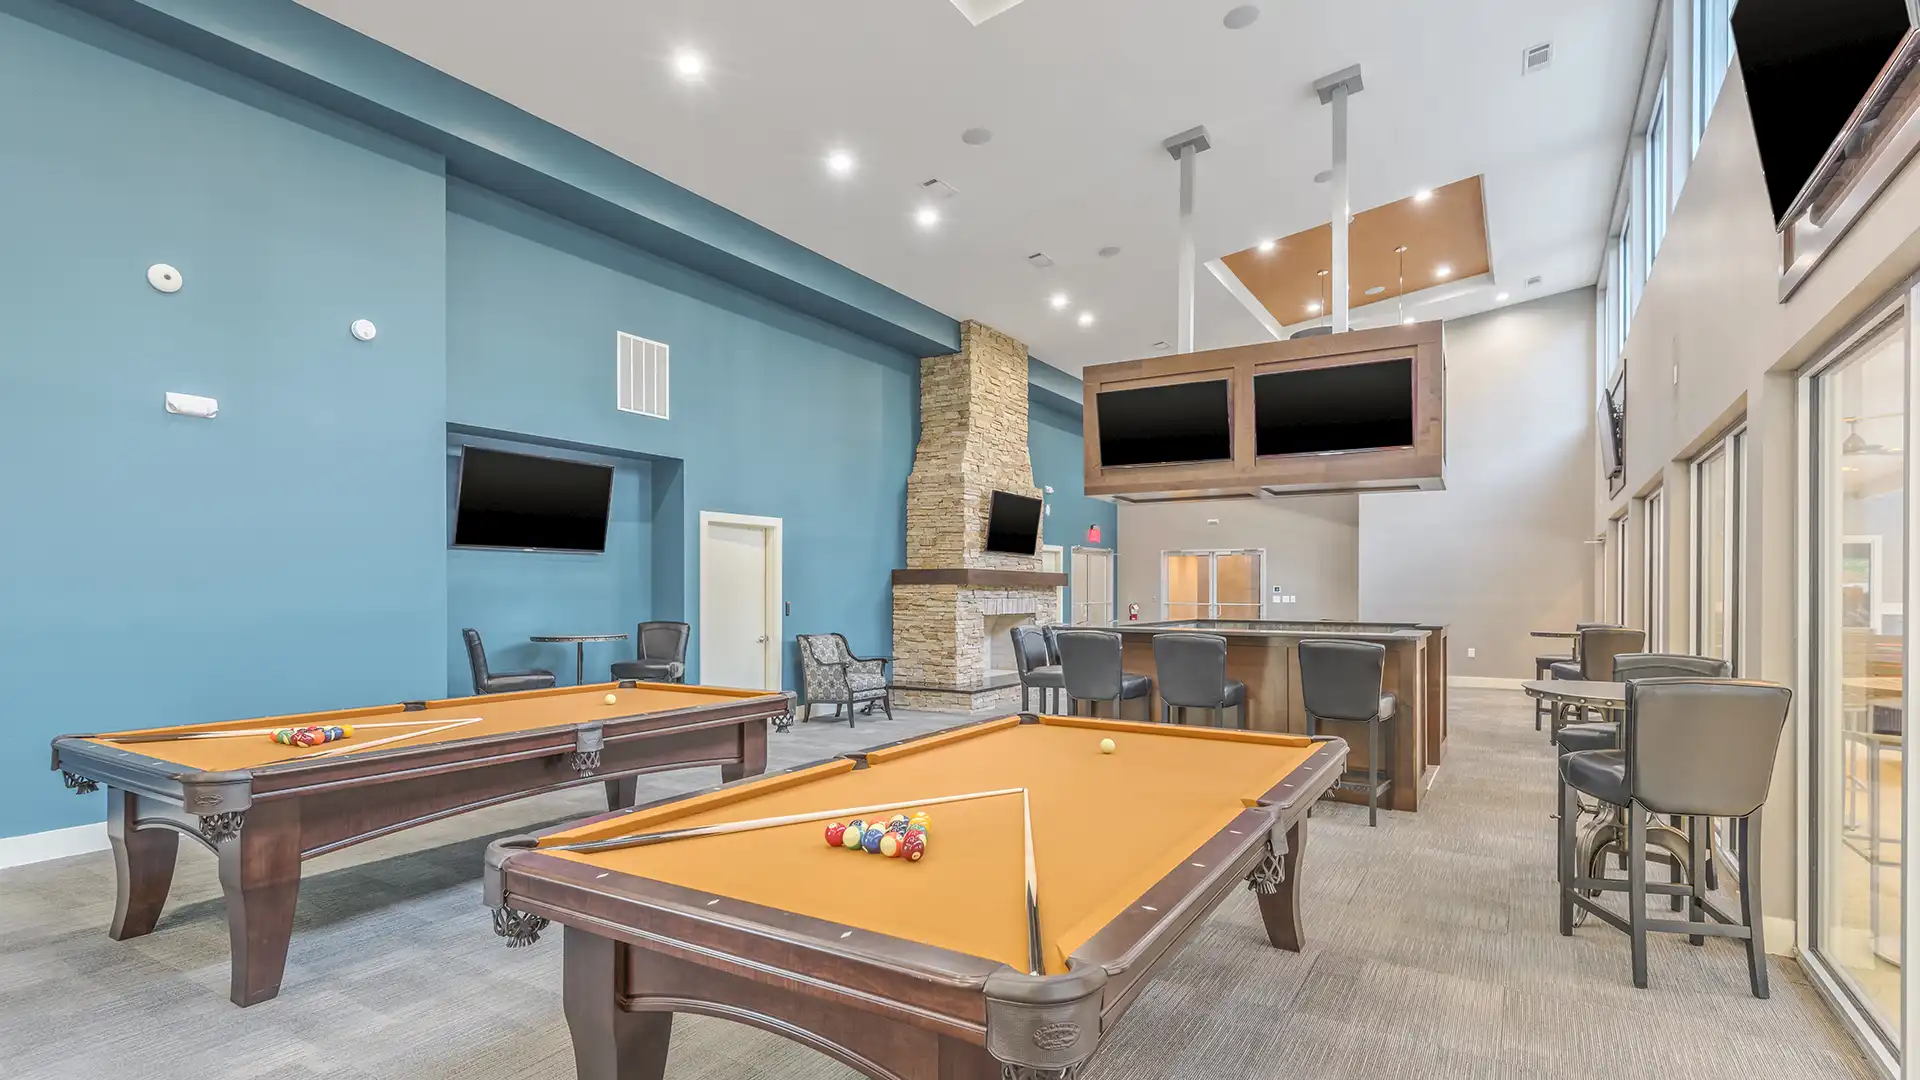 enjoy a game of billiards in the community room